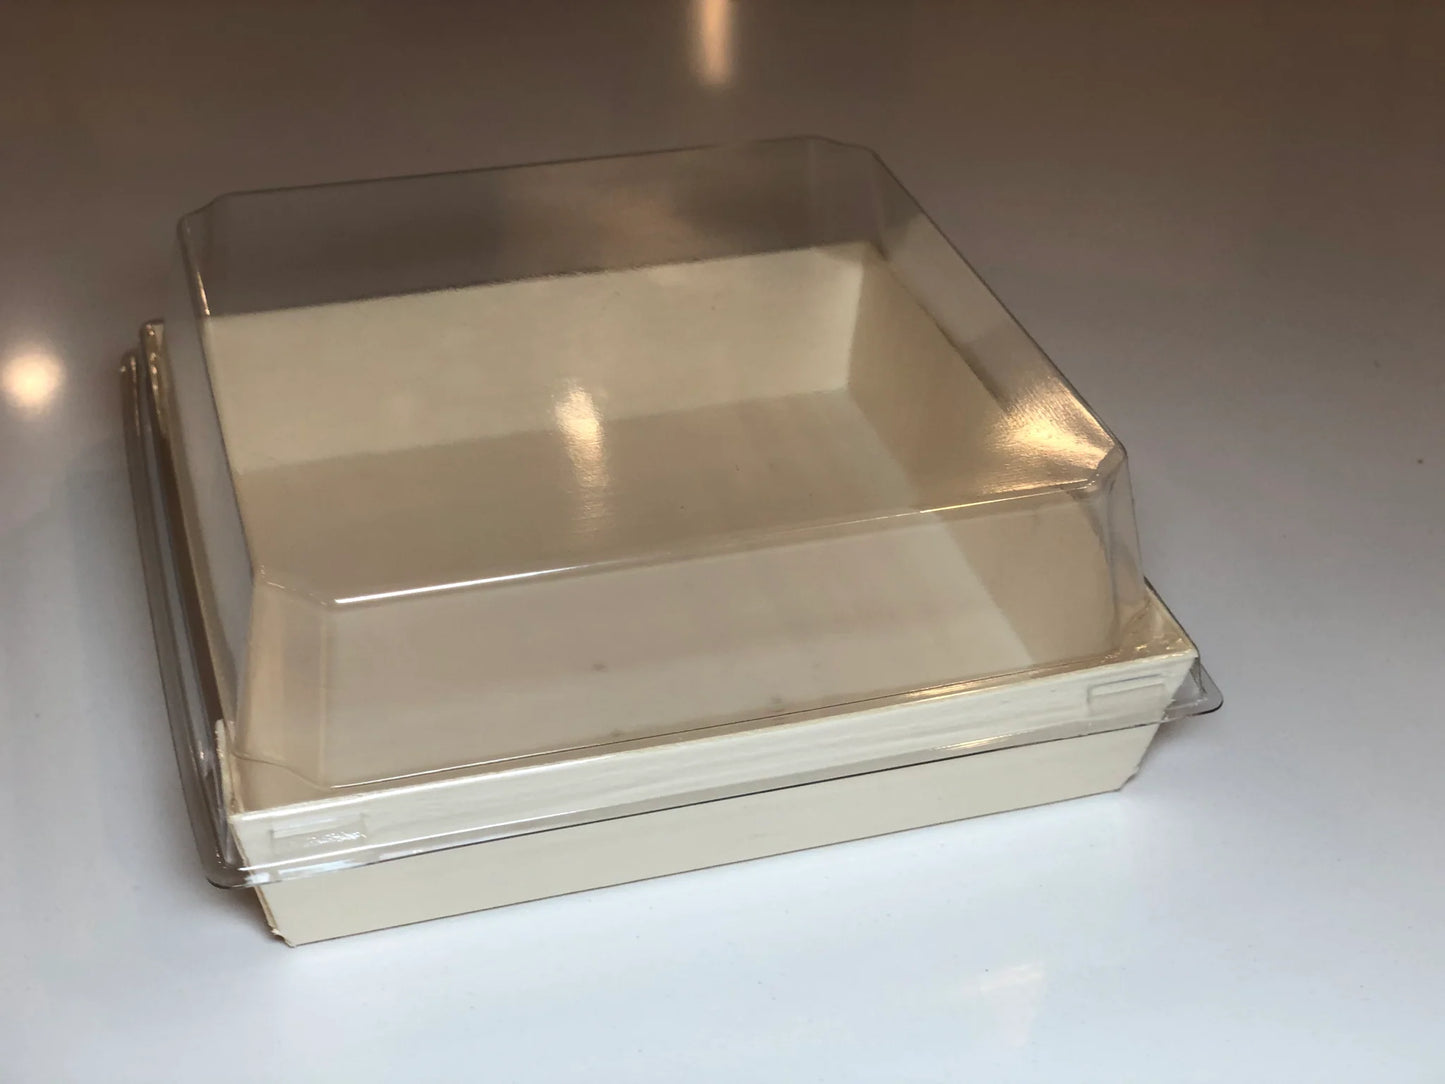 5.6" X 5.6" Covered Tray Set | Compostable Balsa Tray with RPET Lid | 100 of each